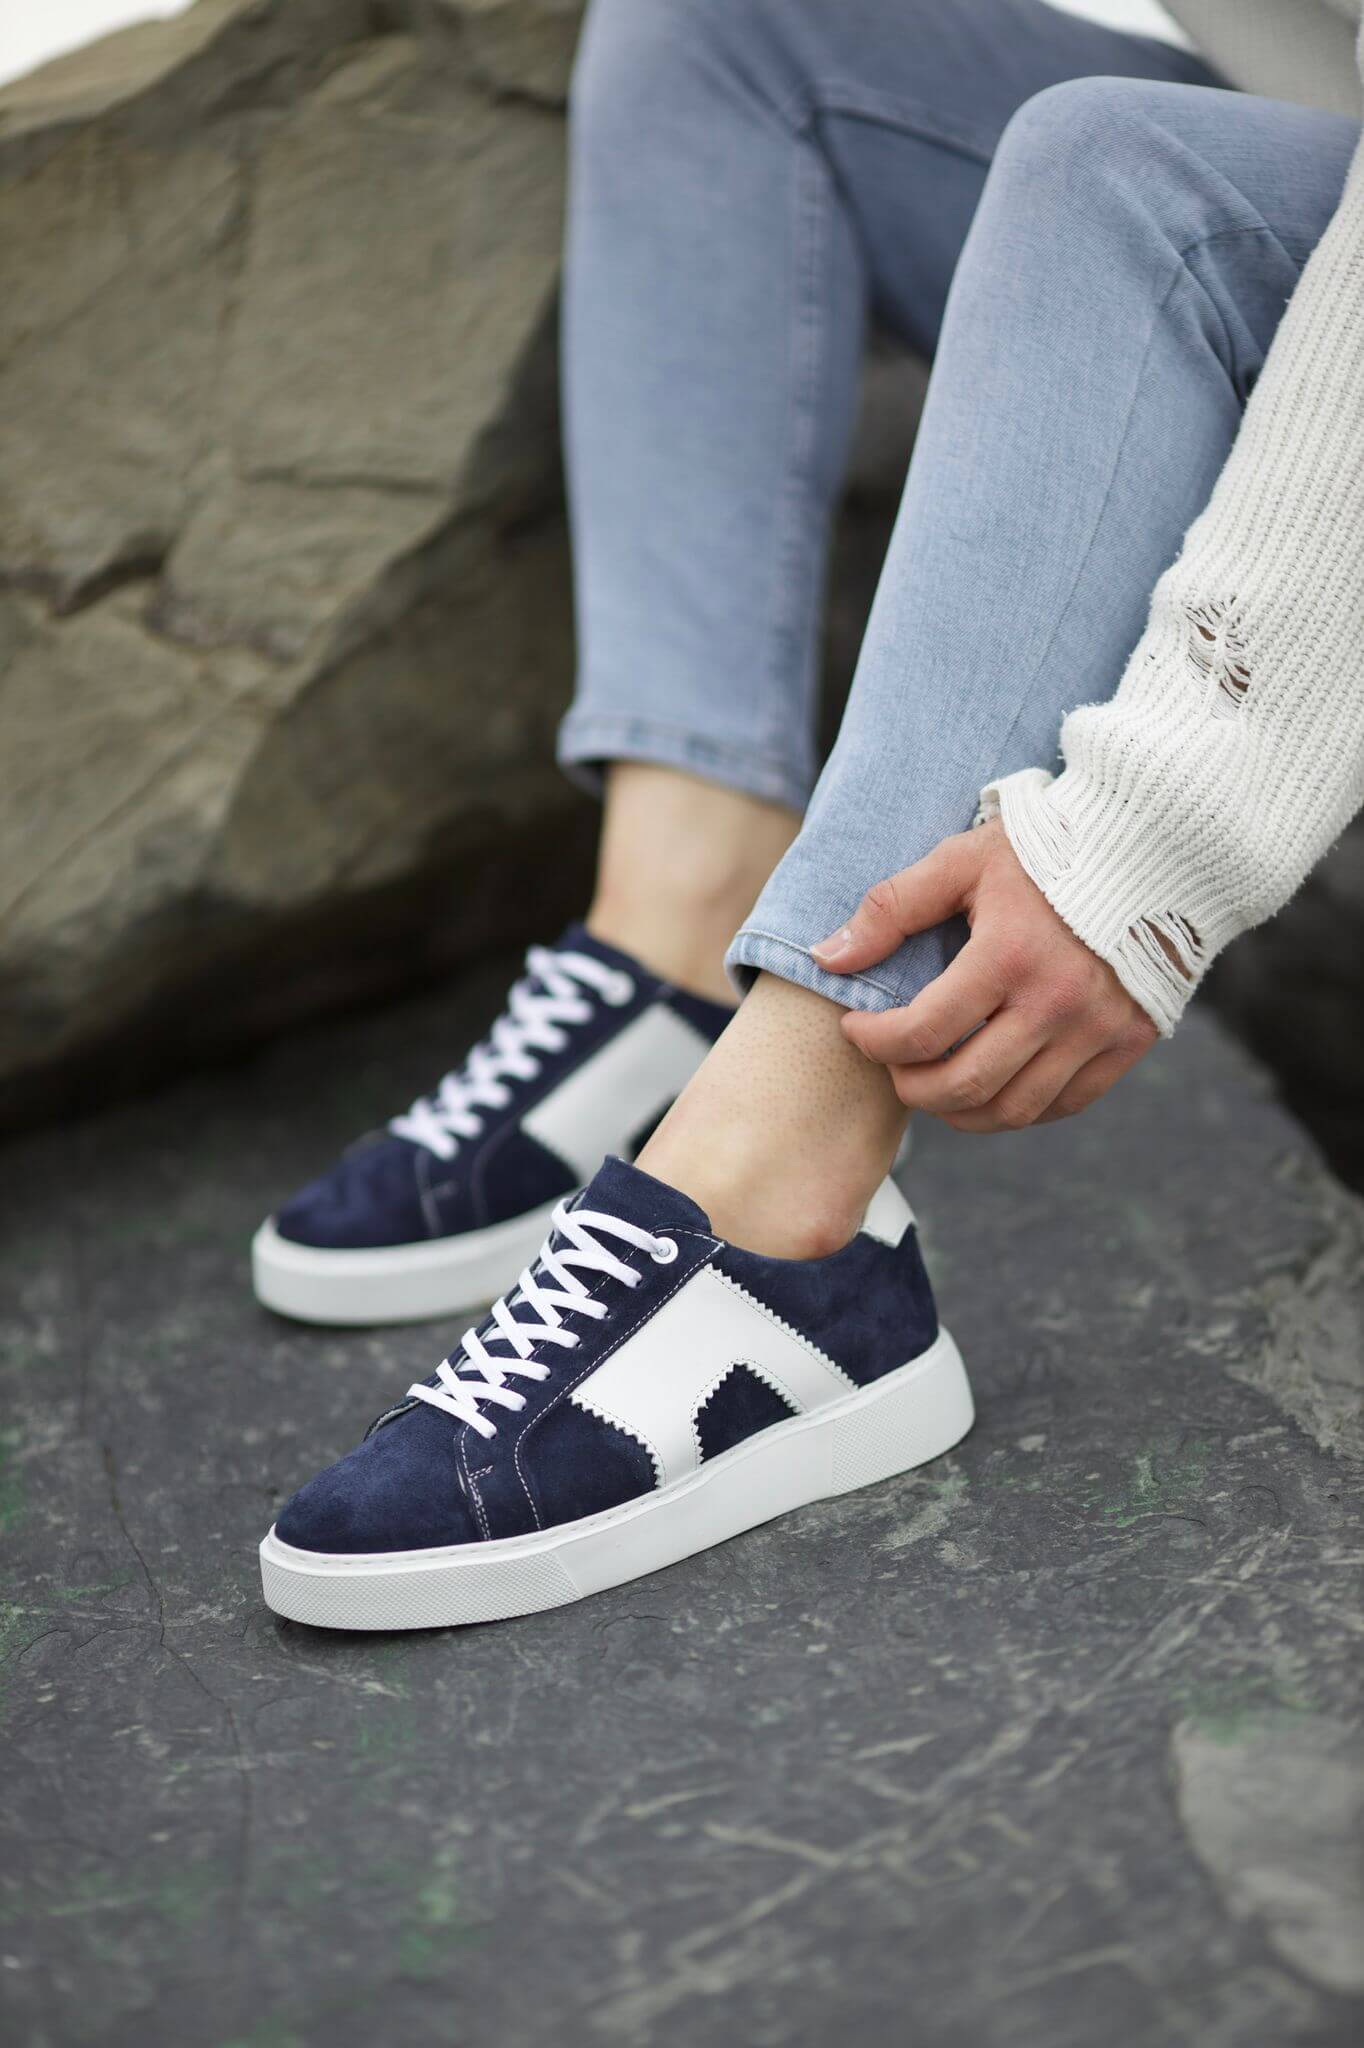 A Navy-Blue Lace Up Sneaker on display.